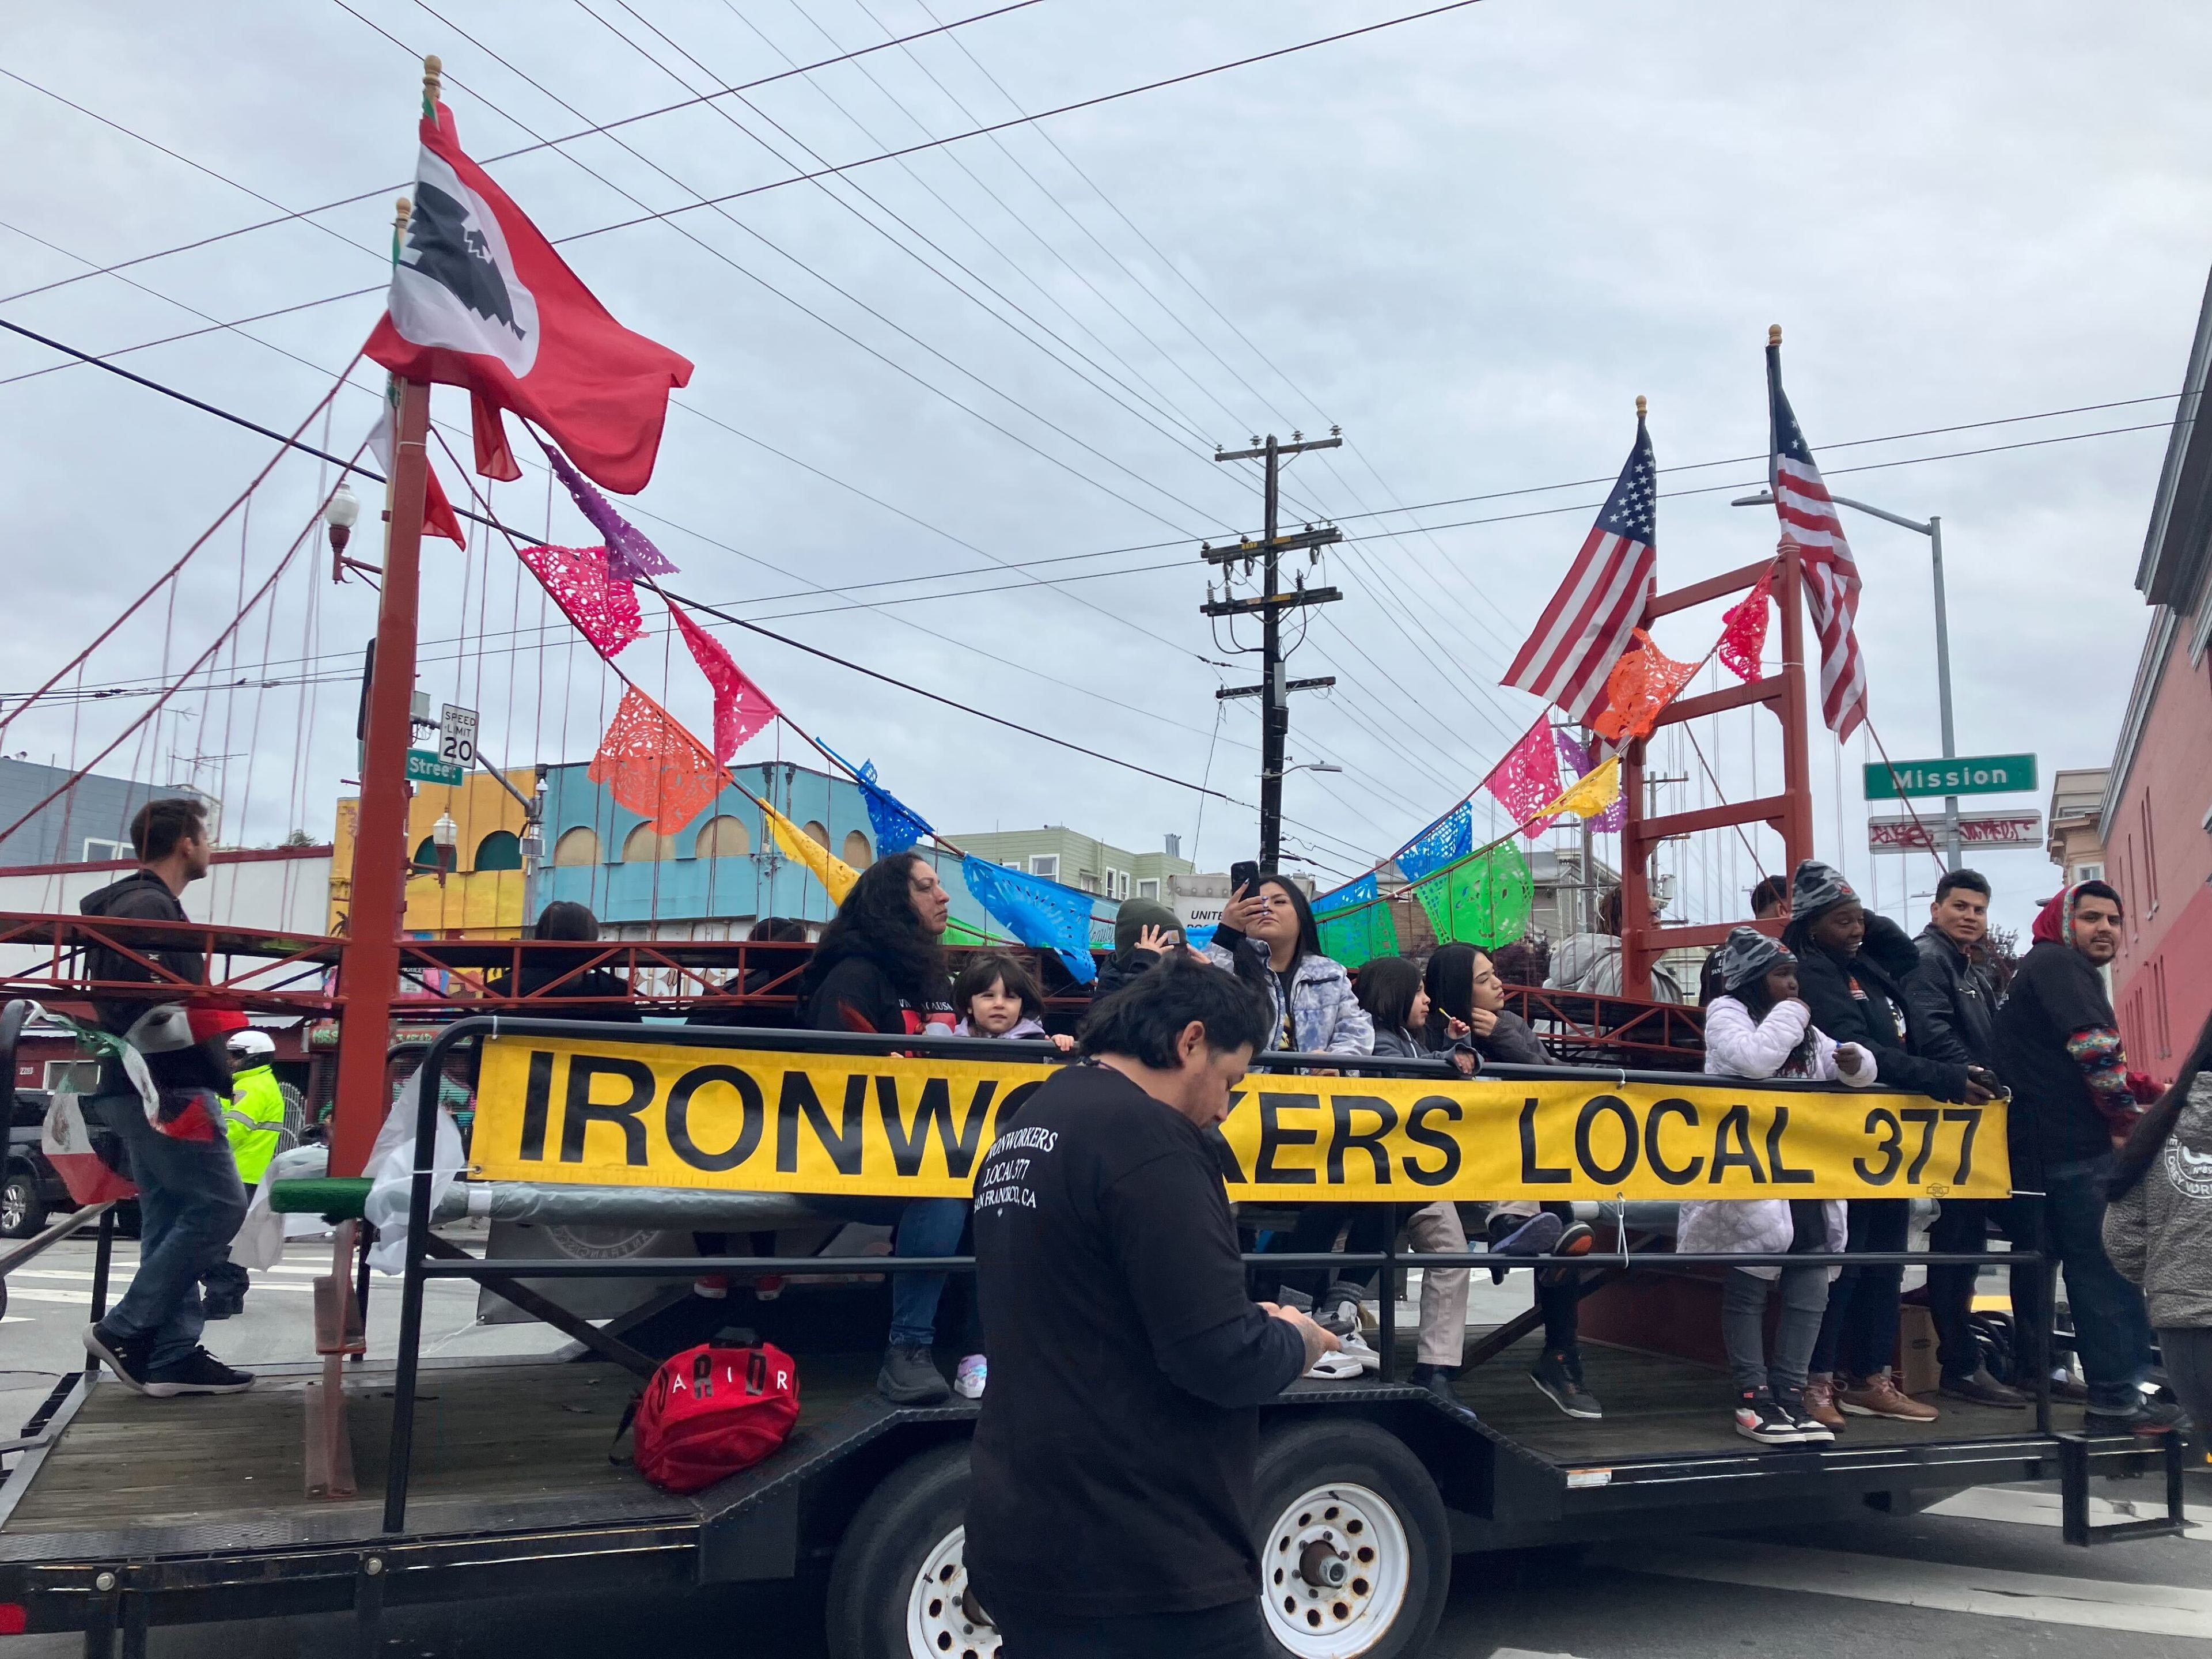 A parade float with people, flags, and a &quot;IRONWORKERS LOCAL 377&quot; banner, moving through a street.